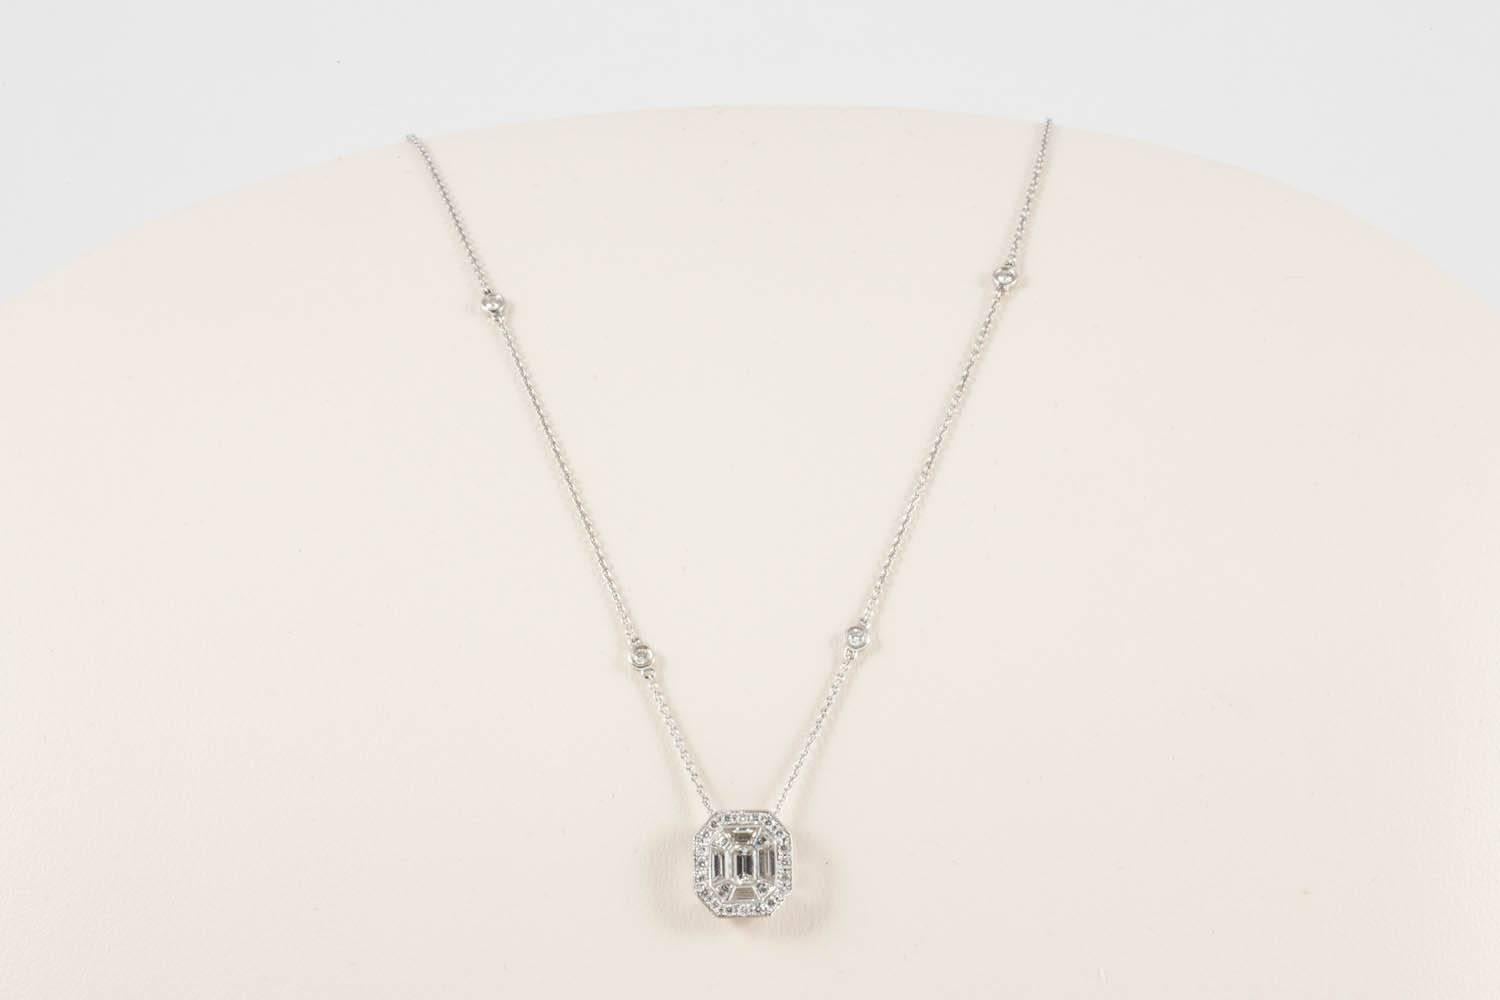 A very pretty, Art Deco inspired diamond pendant set to a fine diamond set chain. The use of baguette and round cut diamonds give the impression of an important single stone necklace with the halo border though clever mounting makes this have all